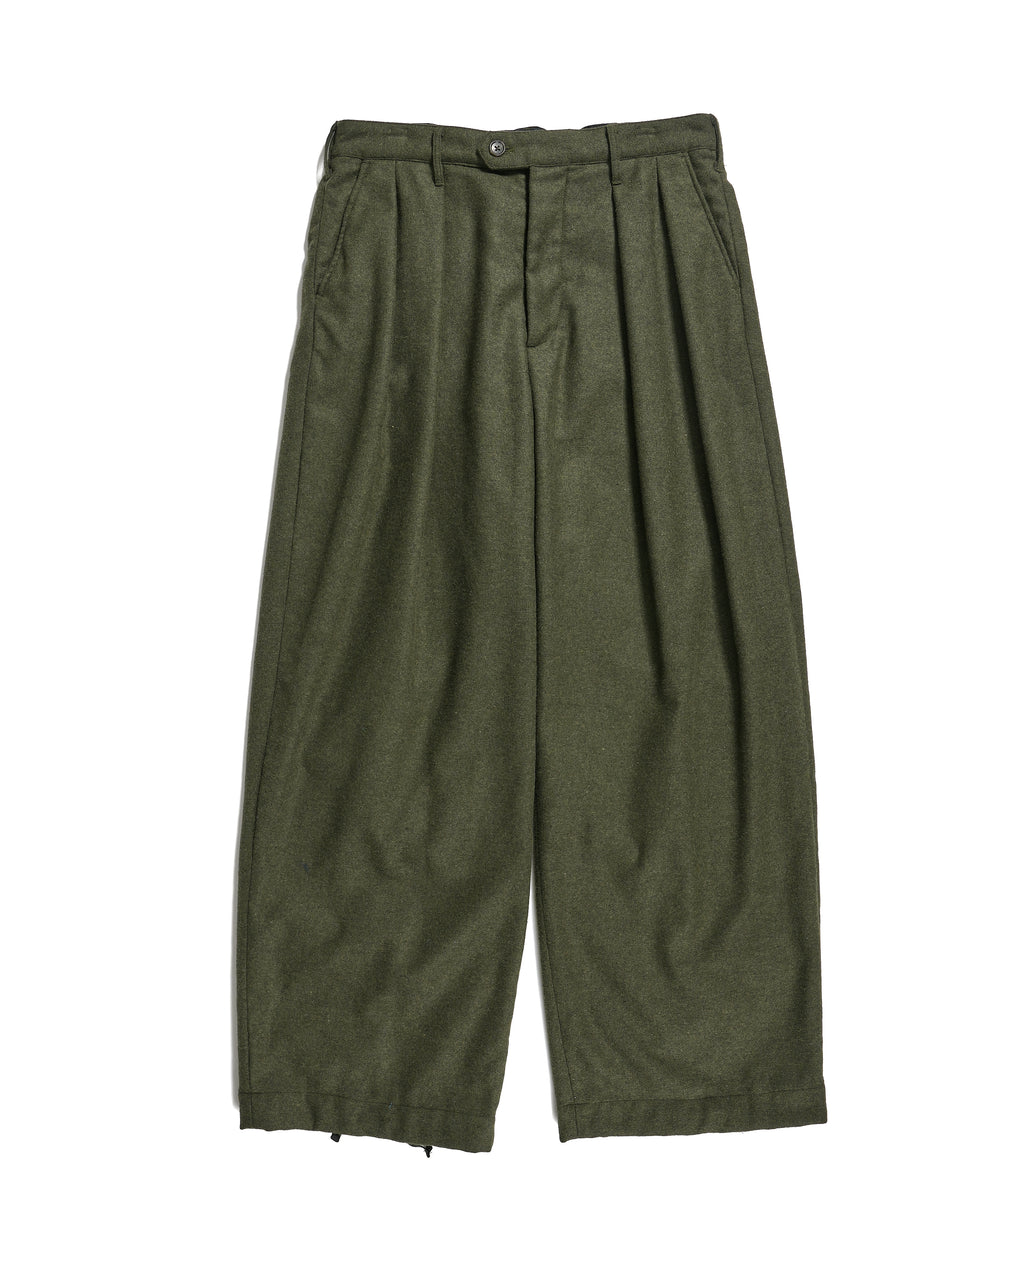 Engineered Garments Oxford Pants -  Olive Solid Poly Wool Flannel